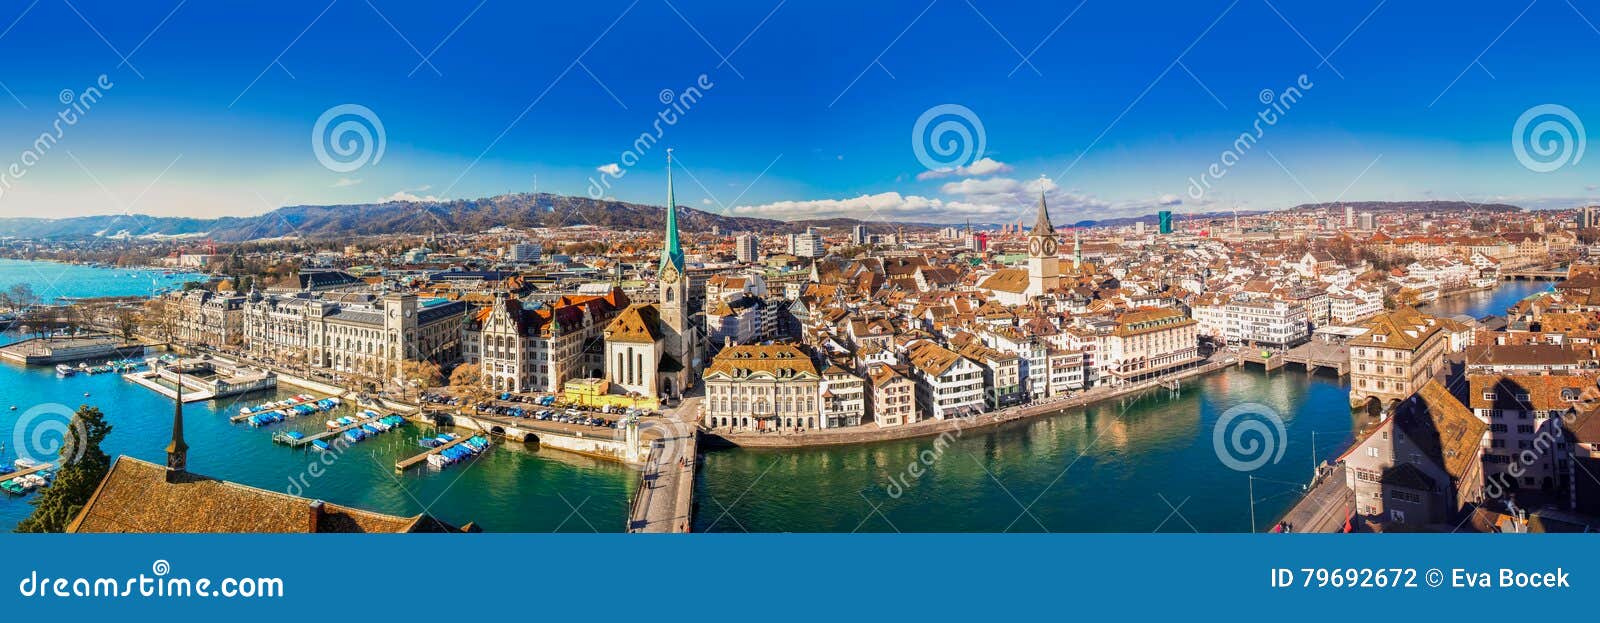 view of historic zurich city center with famous fraumunster chur